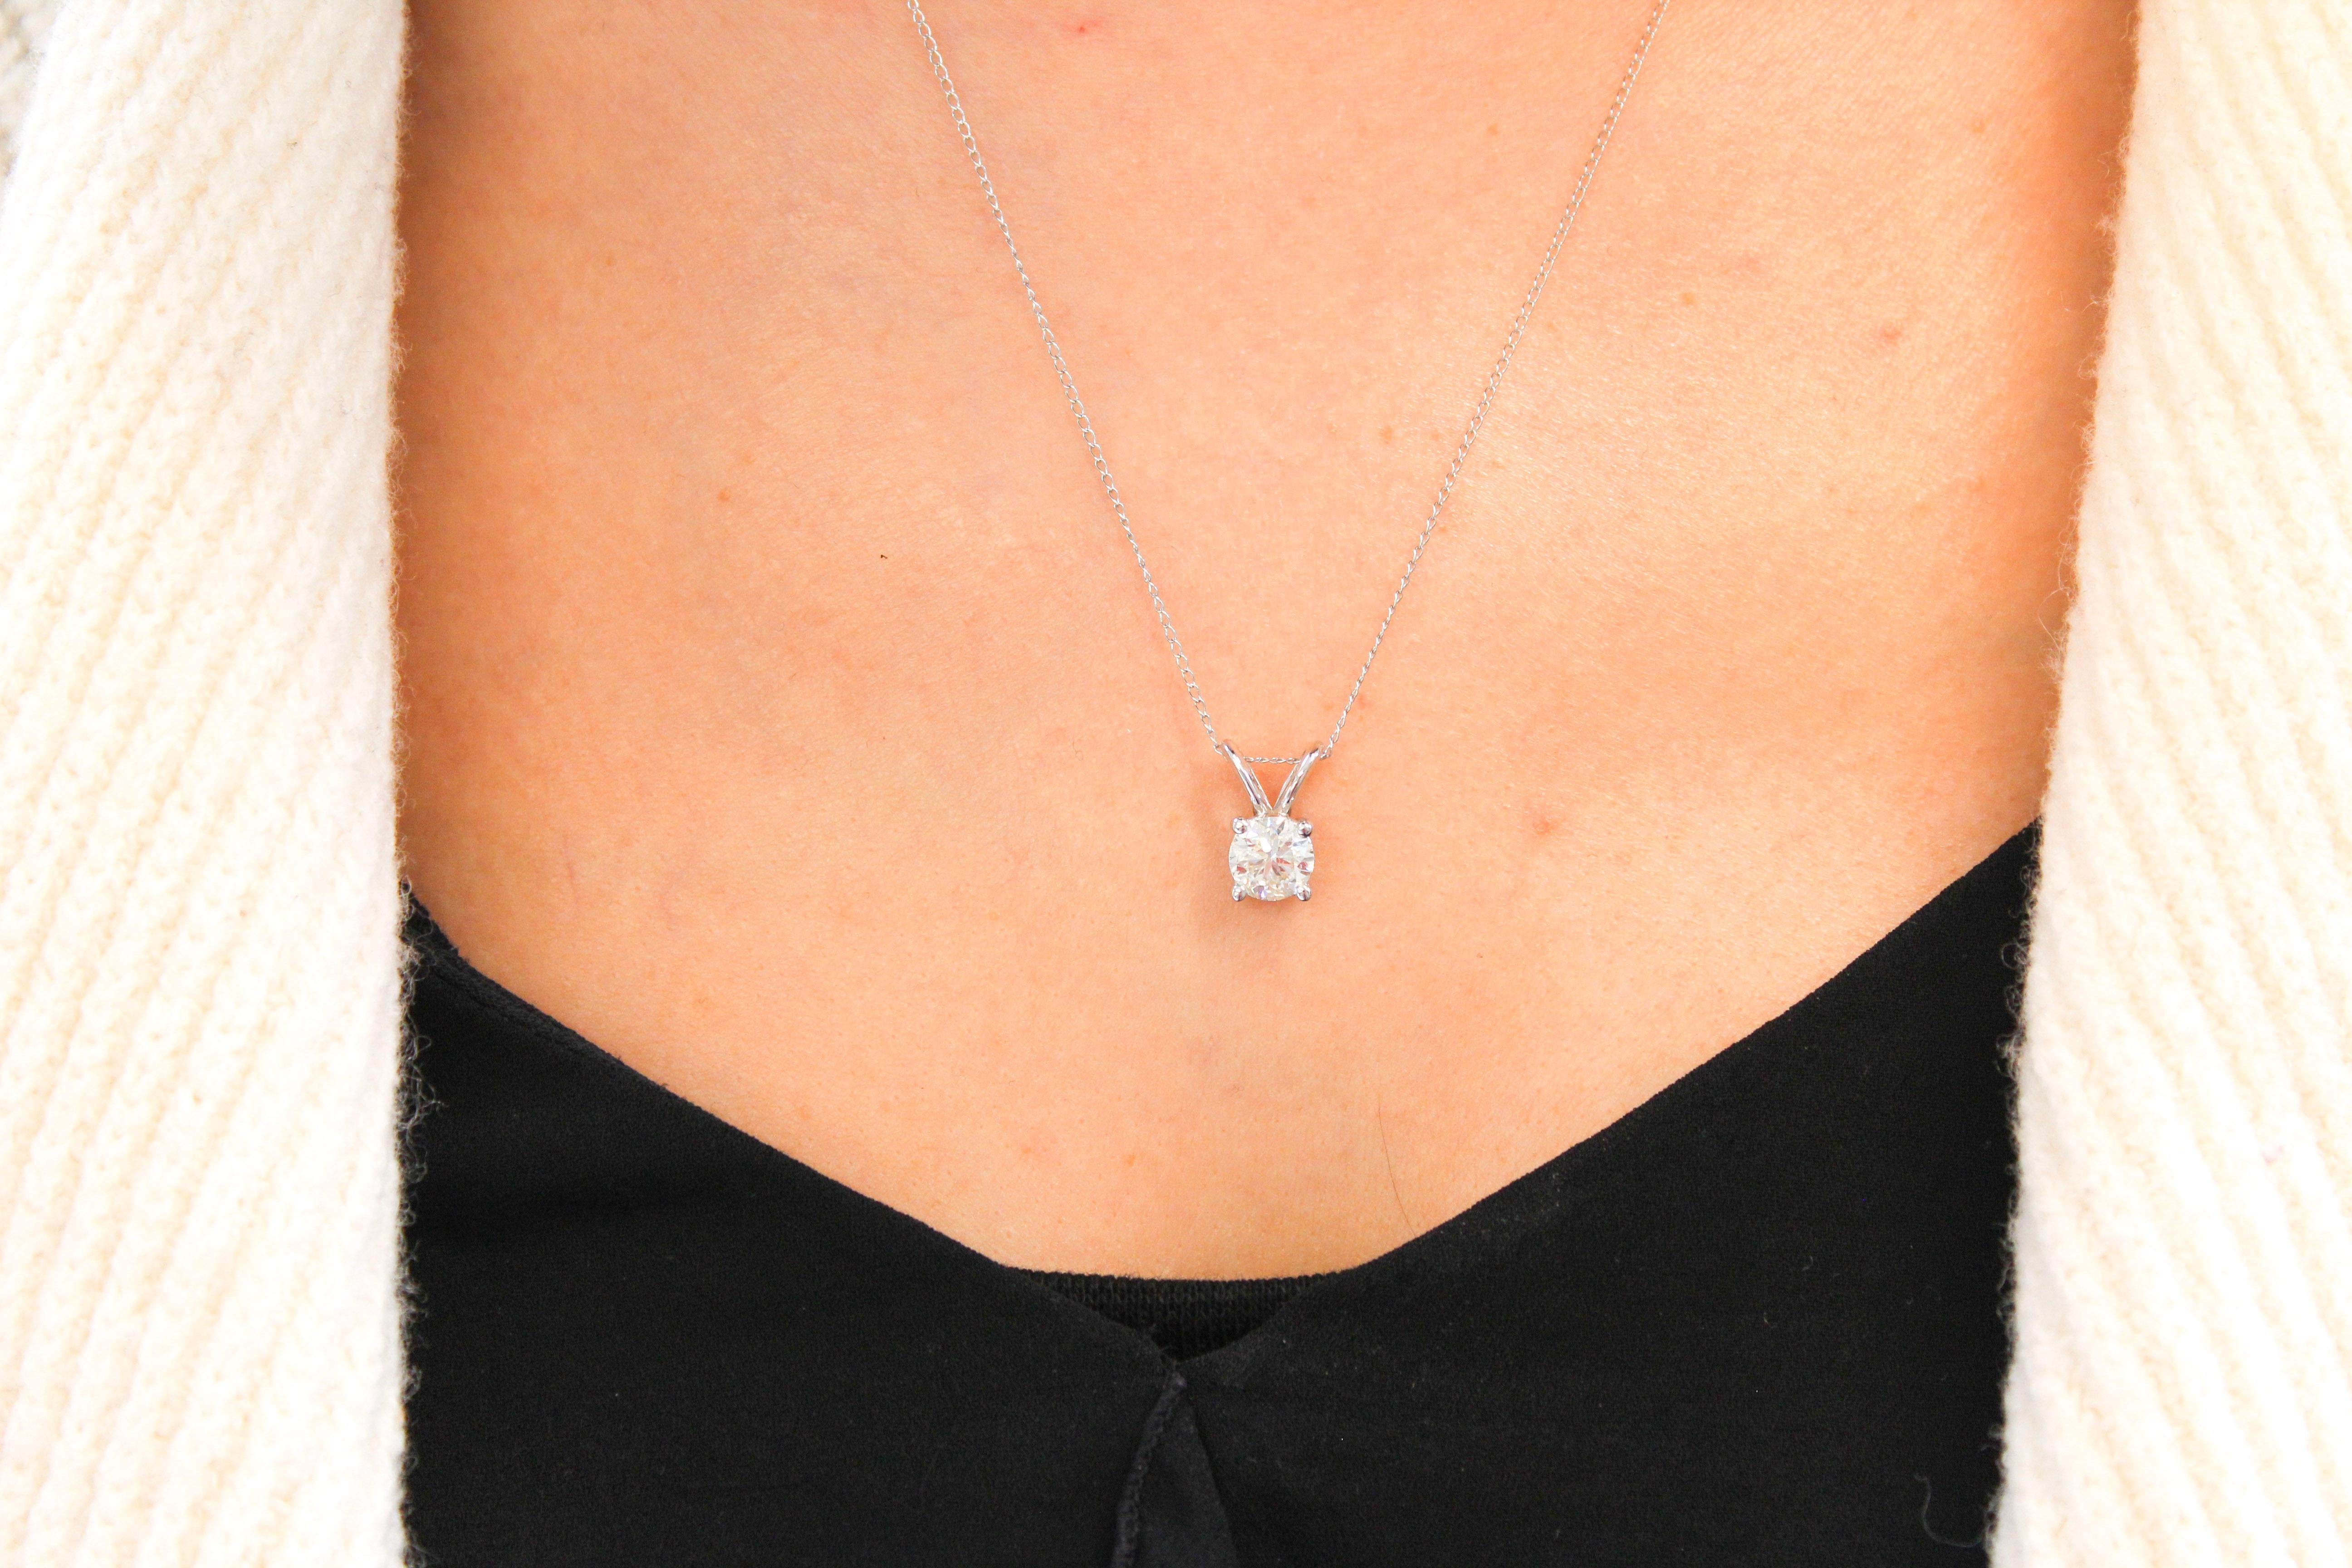 This impressive diamond solitaire pendant is finely crafted in brightly polished 14 karat rose gold and features a round shaped 1.00 carat diamond that has SI clarity, gracefully prong set on a shiny split bail. Ideal as an anniversary or birthday